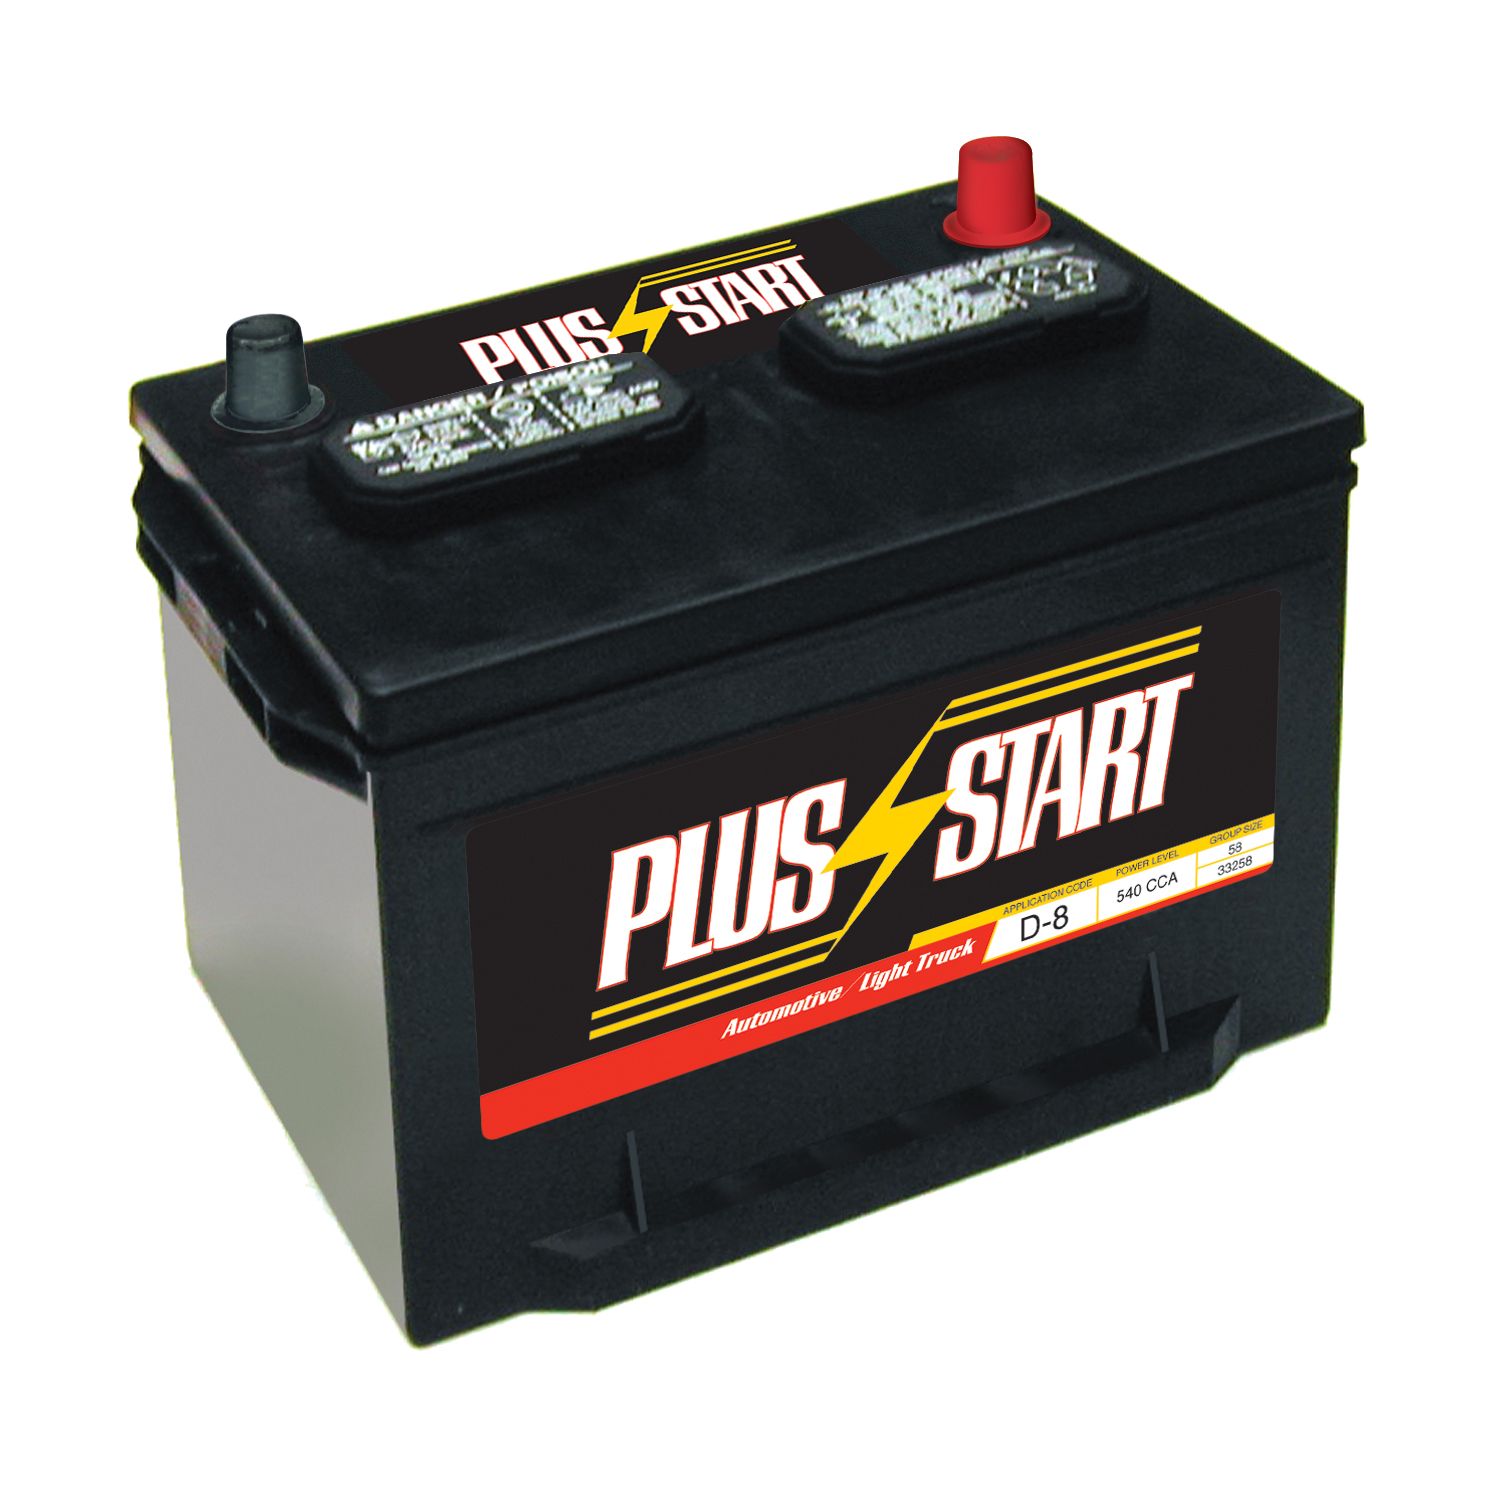 Plus Start Automotive Battery - Group Size JC-58 (Price with Exchange)